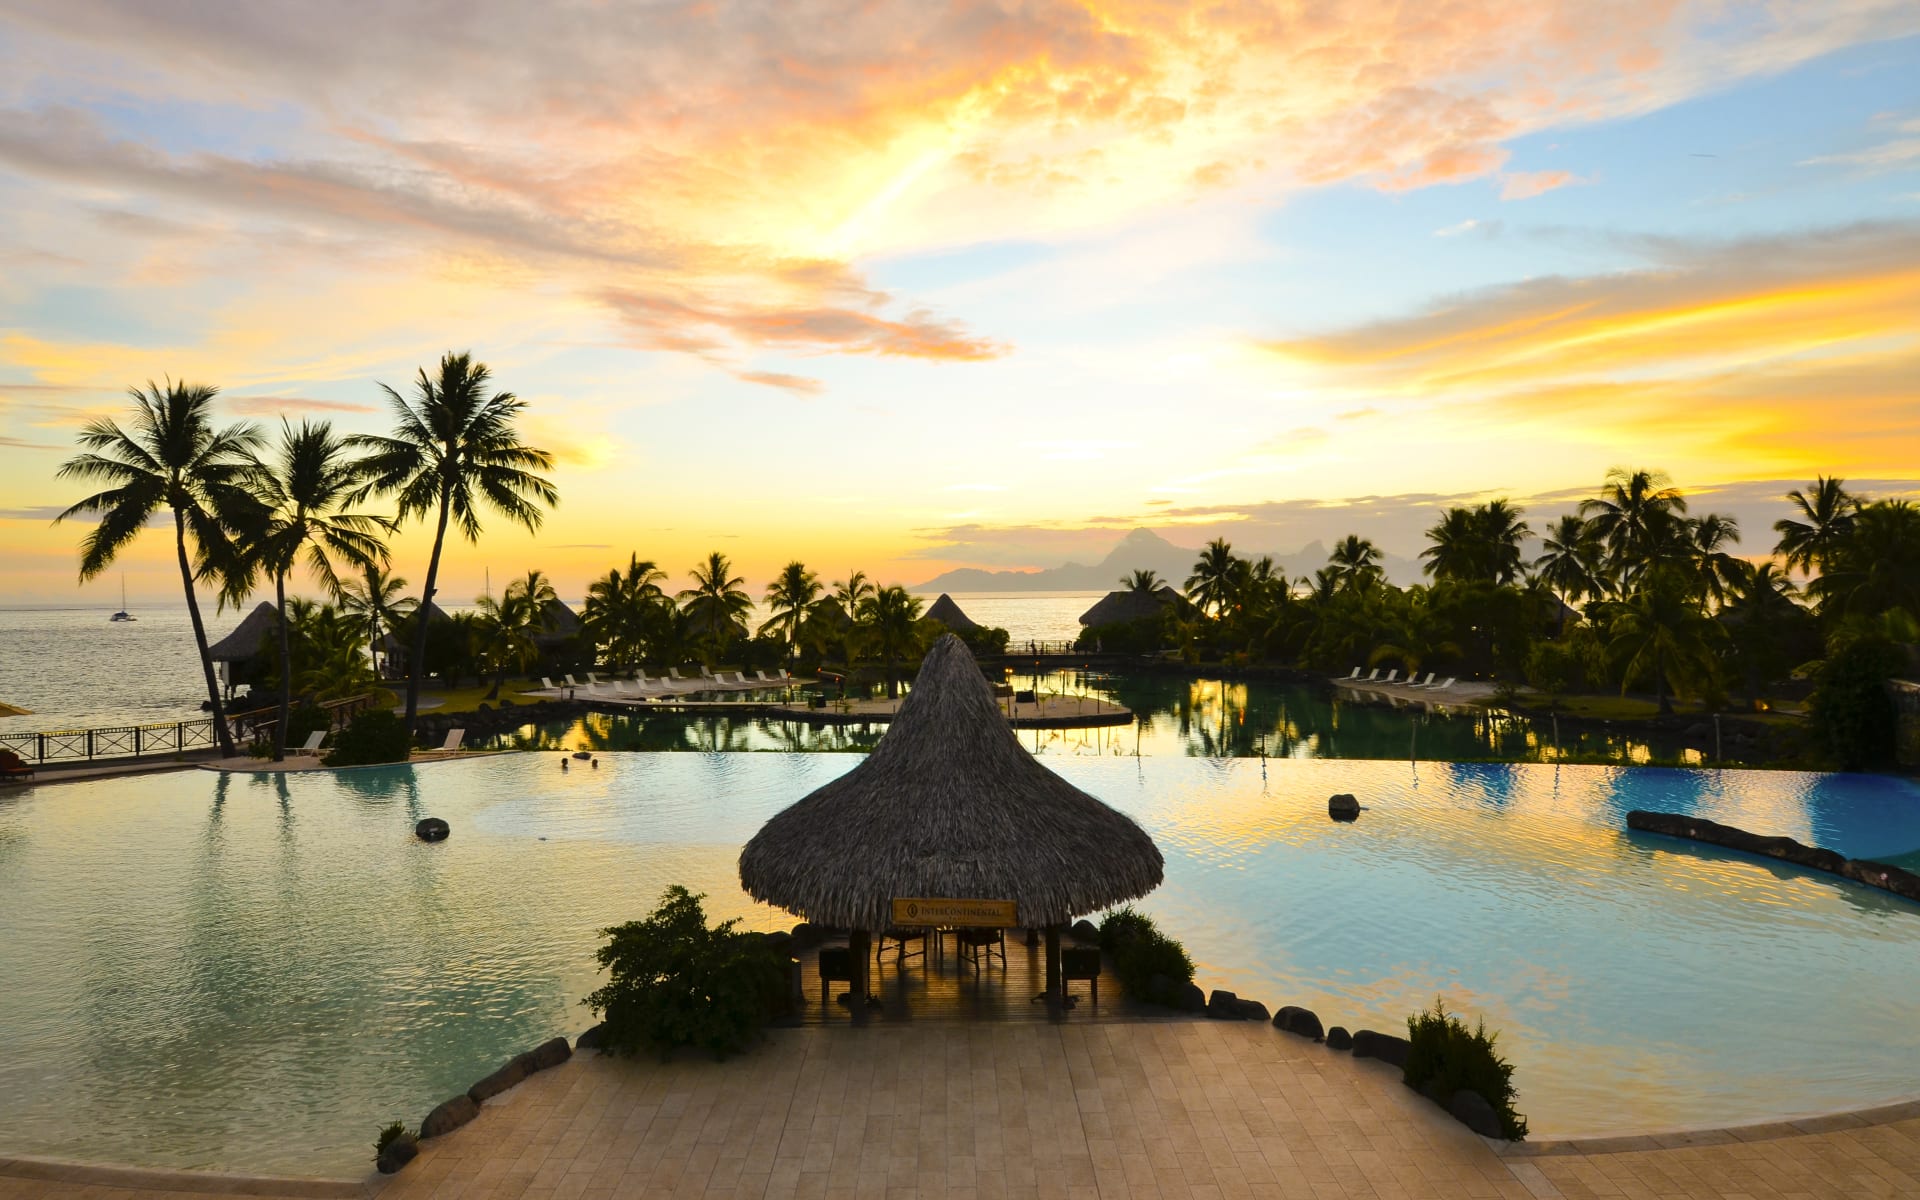 The sun is setting on the swimming pool, backed by the ocean and palm trees. 